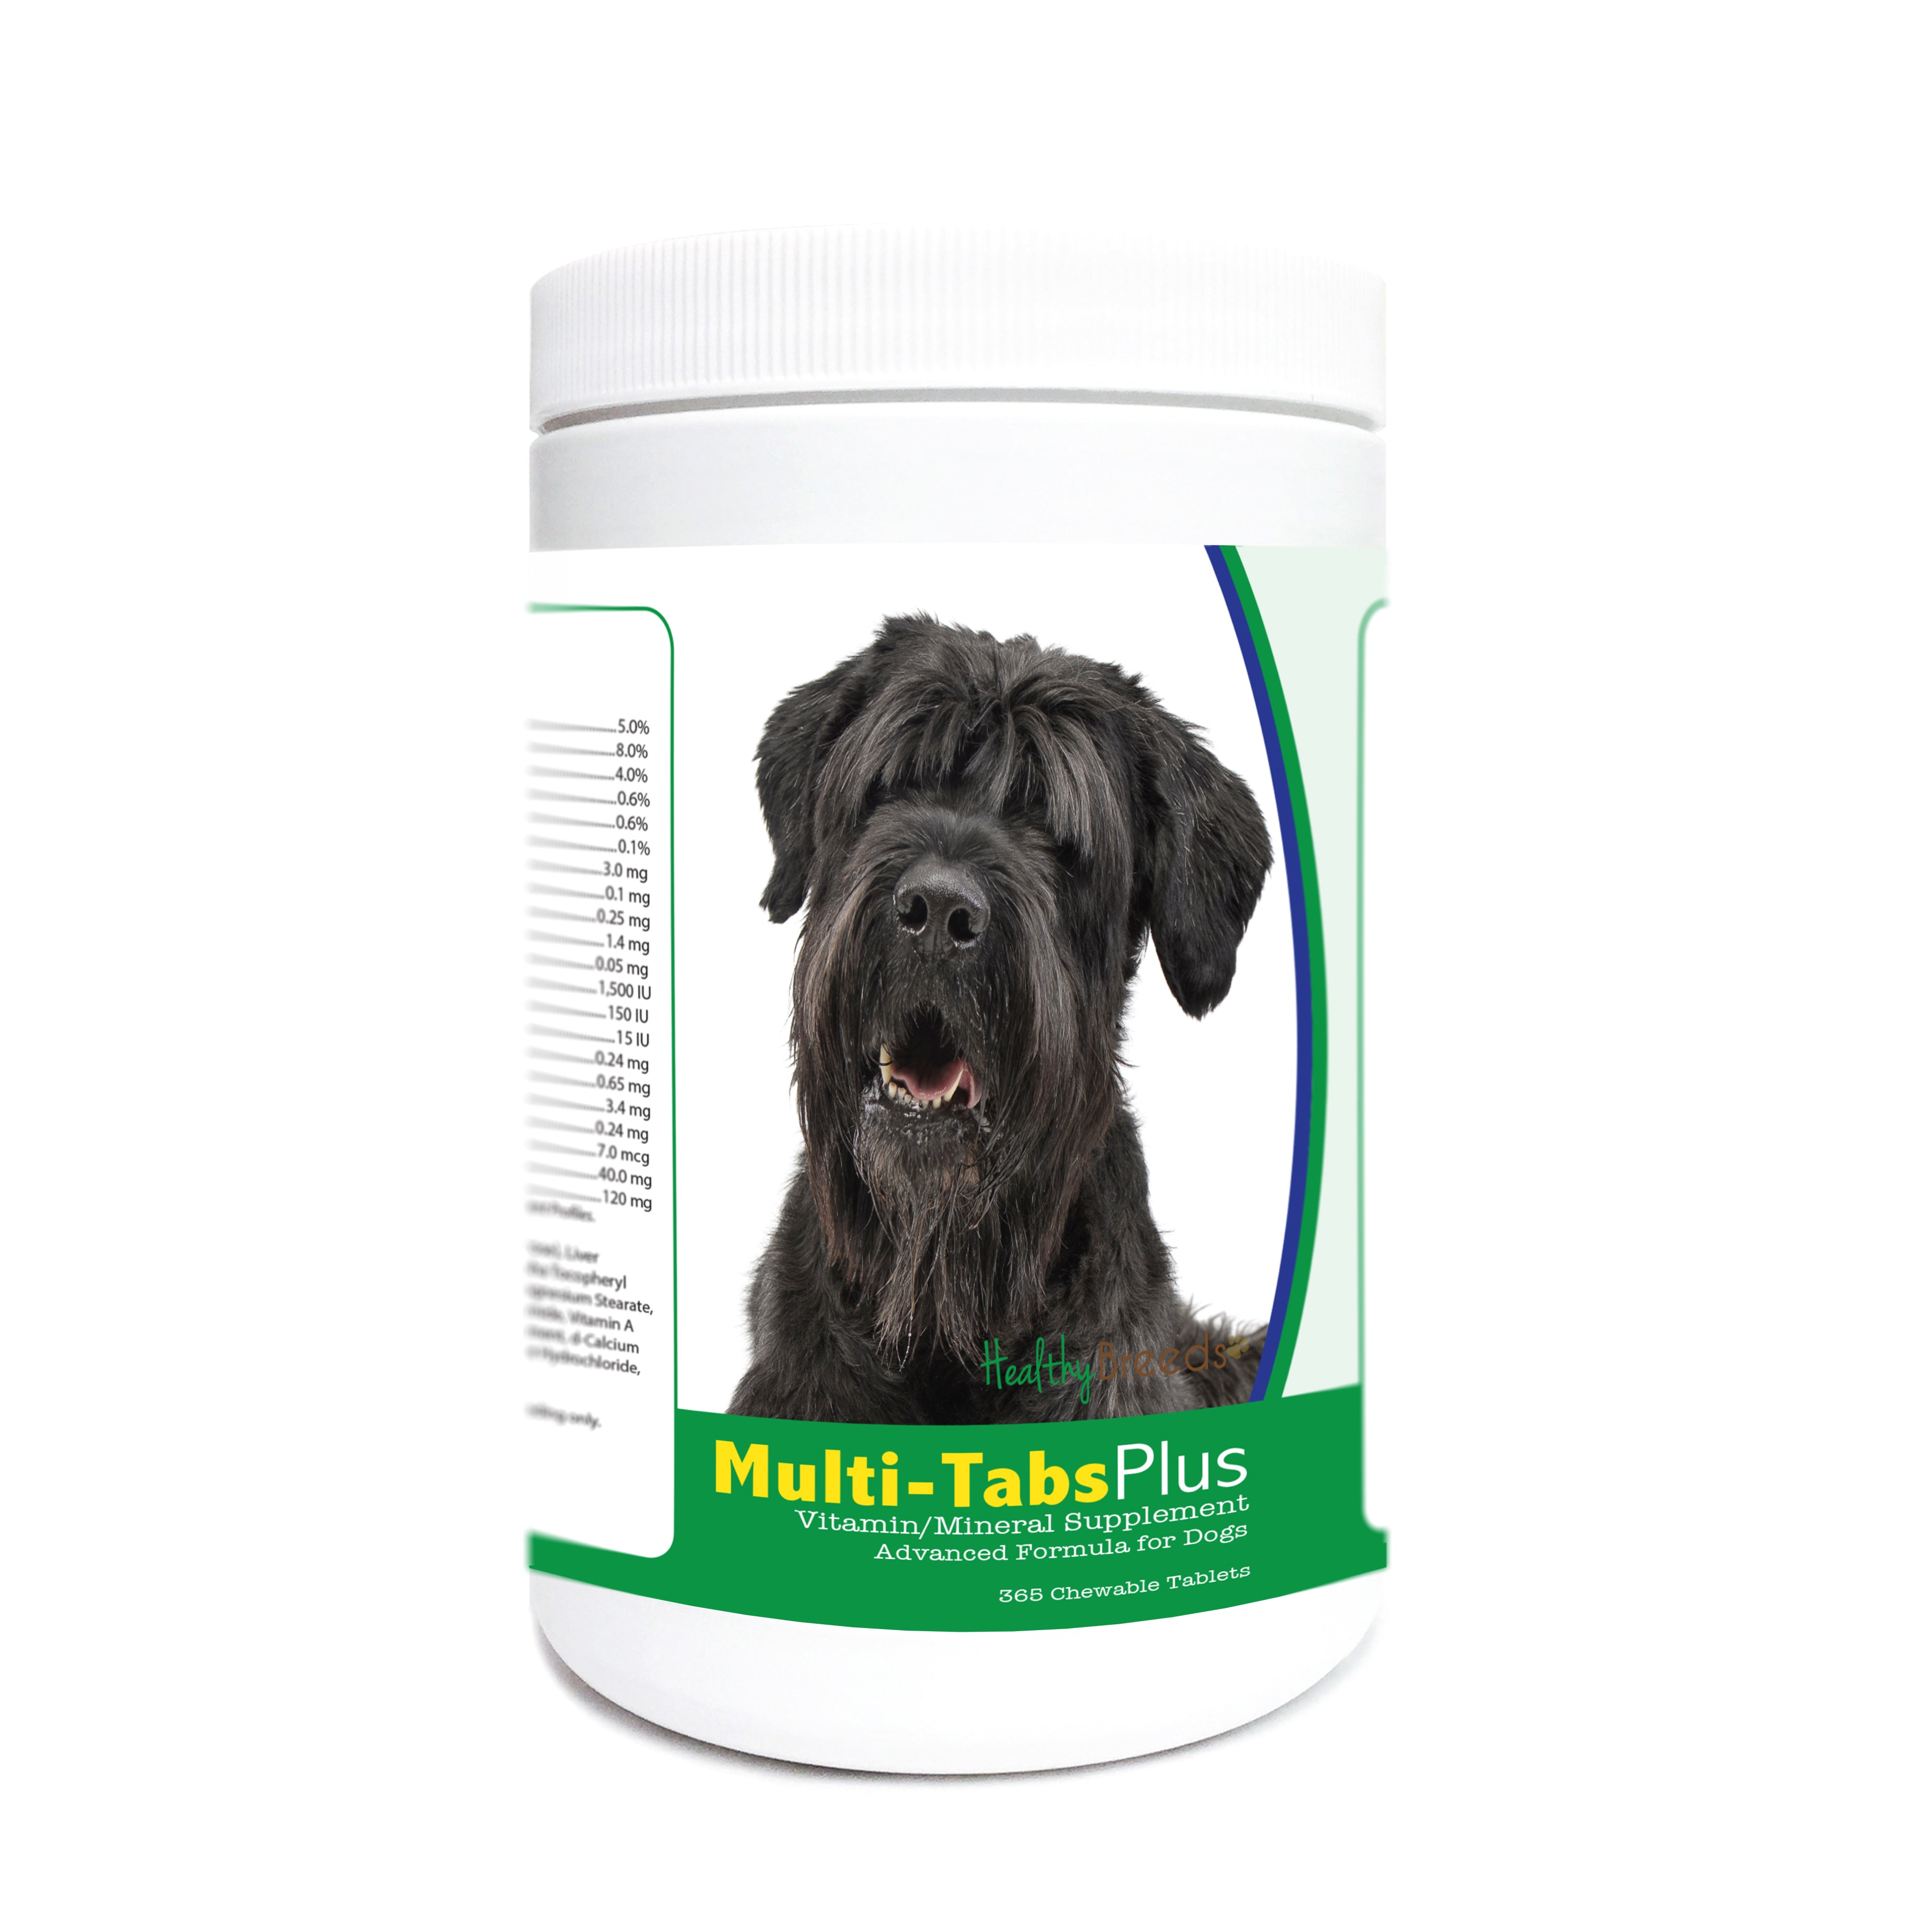 Black Russian Terrier Multi-Tabs Plus Chewable Tablets 365 Count